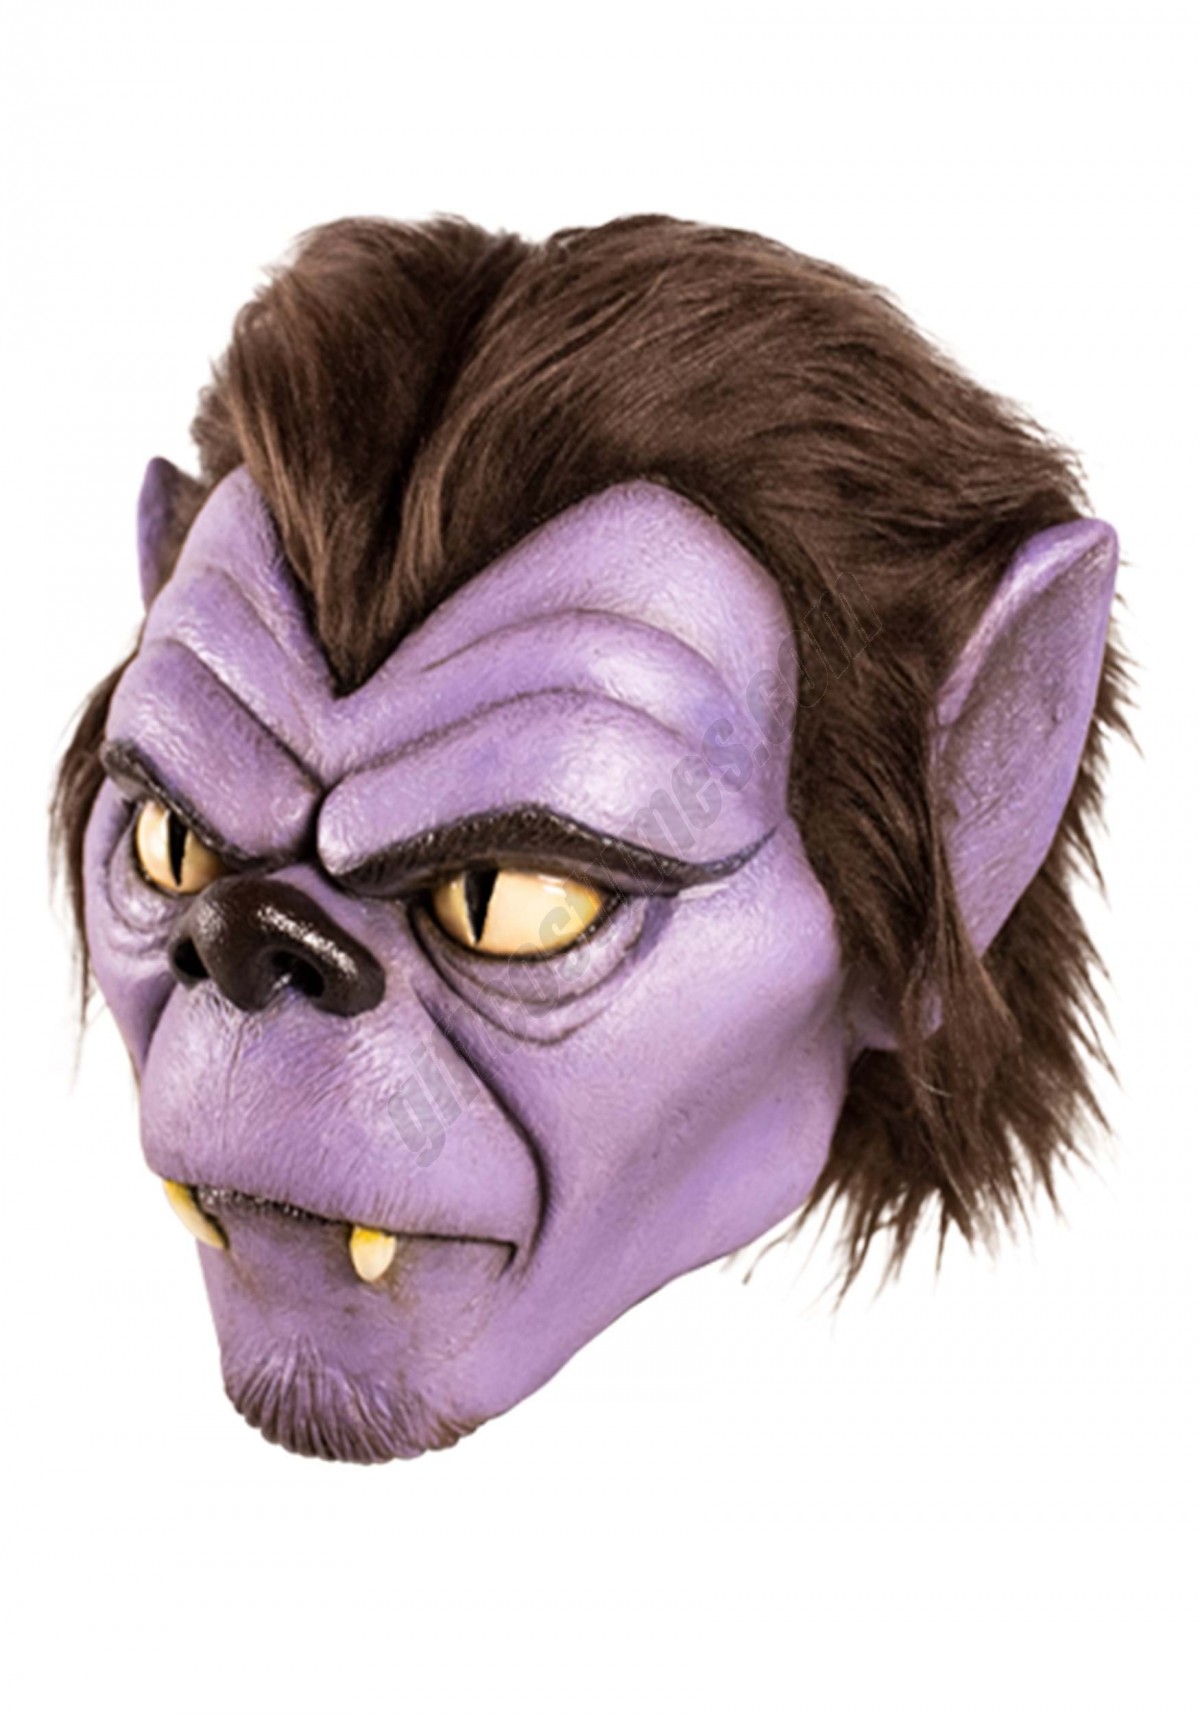 Wolfman Mask from Scooby Doo  Promotions - -1